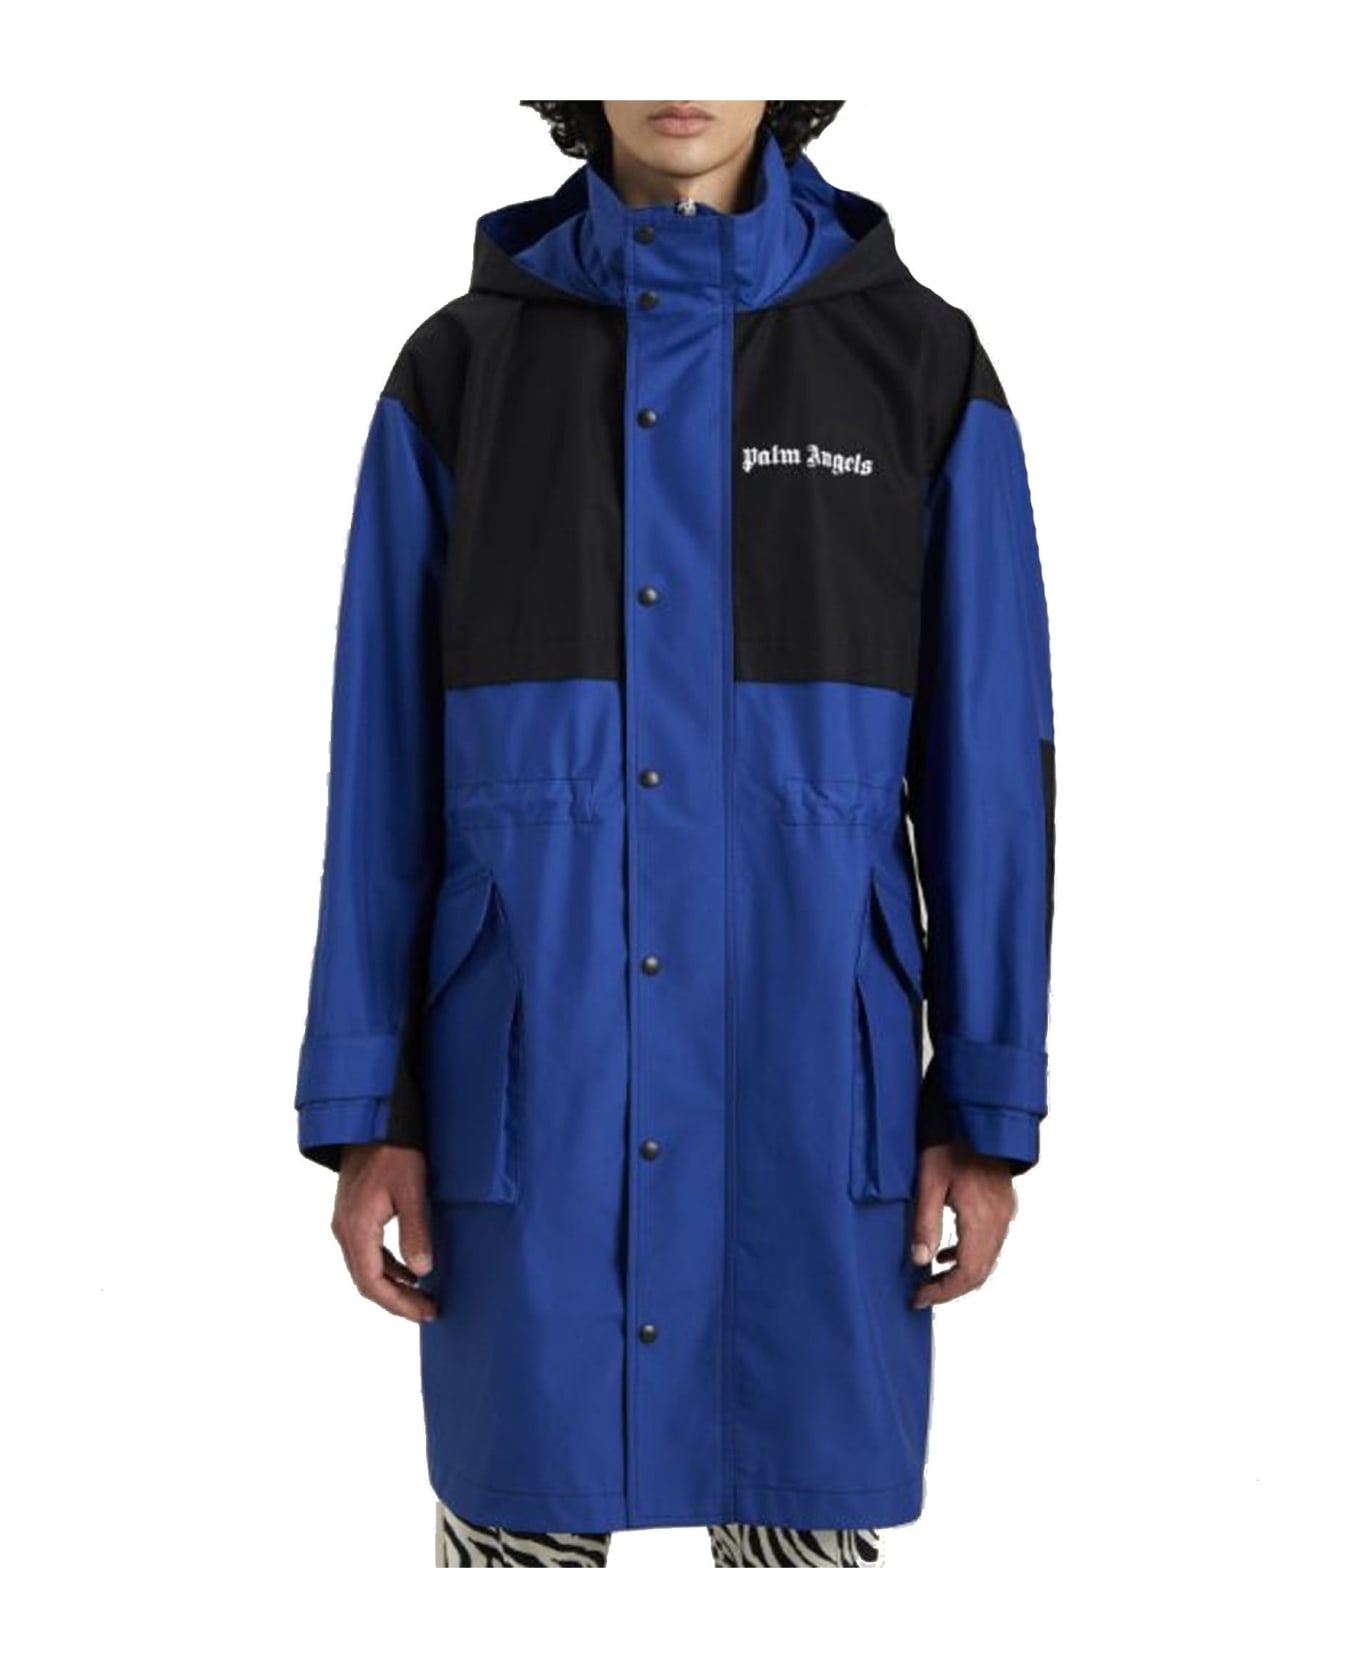 Palm Angels Hooded Trench Coat - Blue